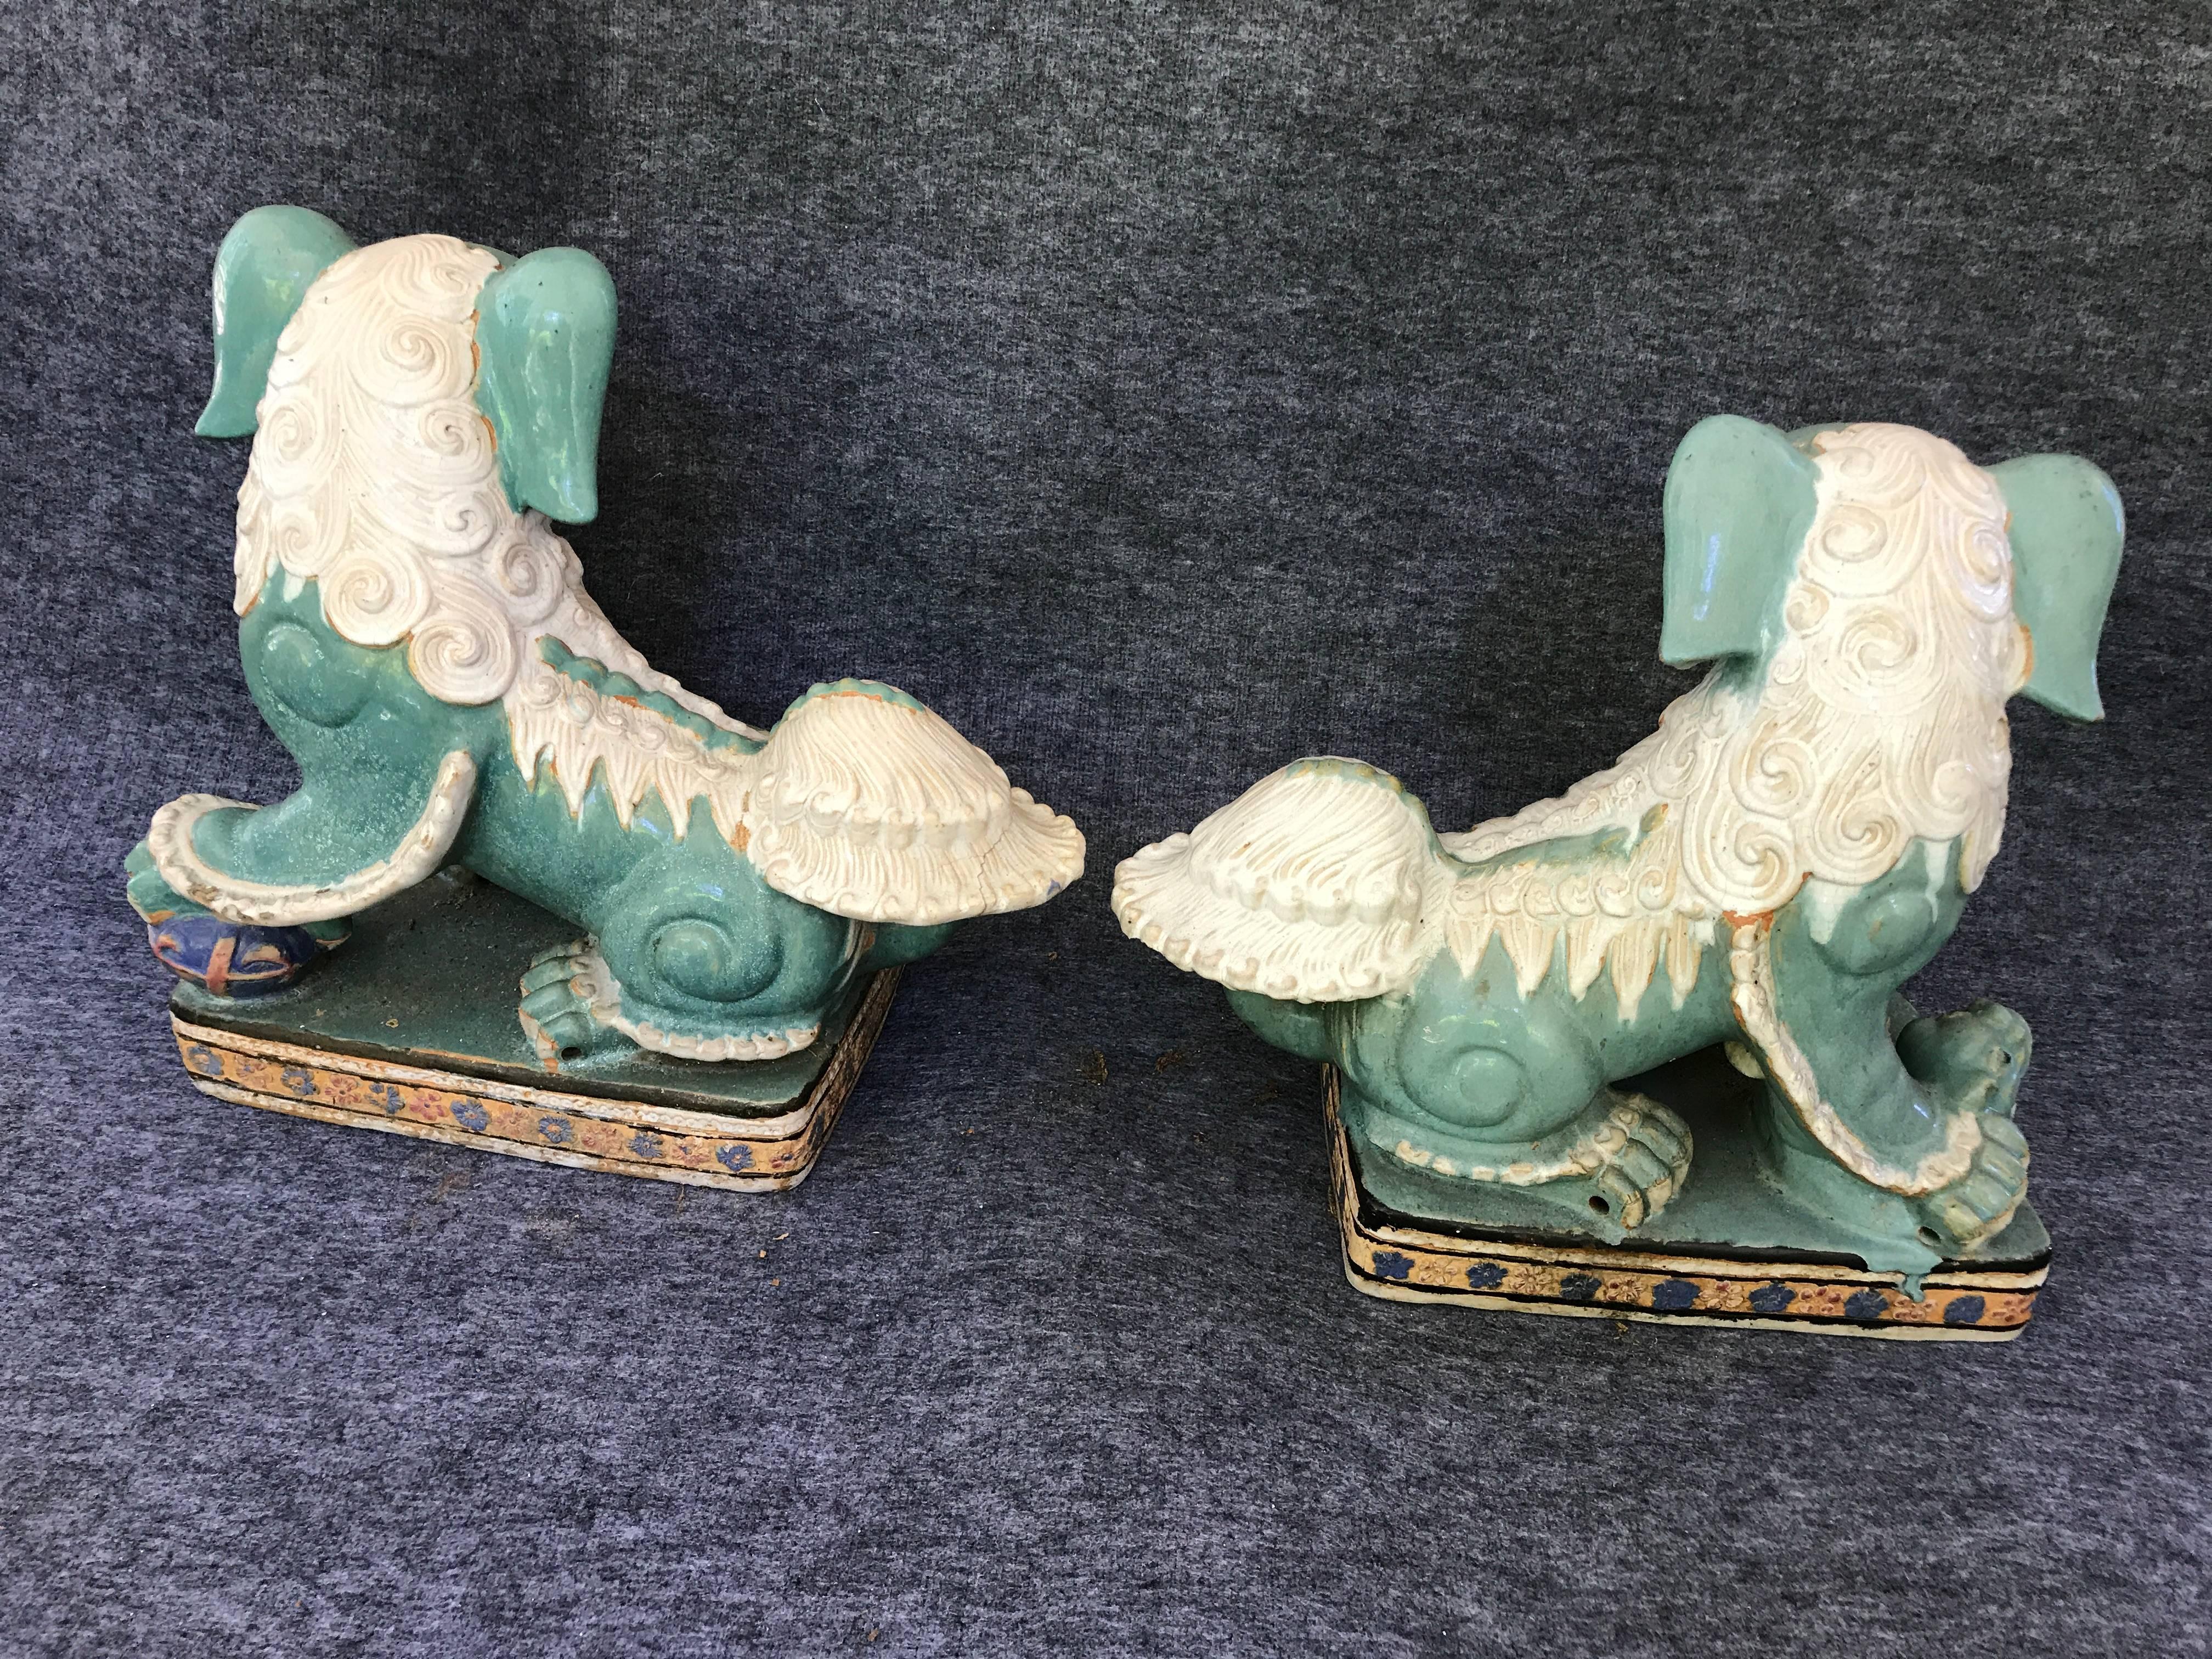 1970s Large Terracotta Turquoise and White Foo Dog Sculpture Statues, Pair 2